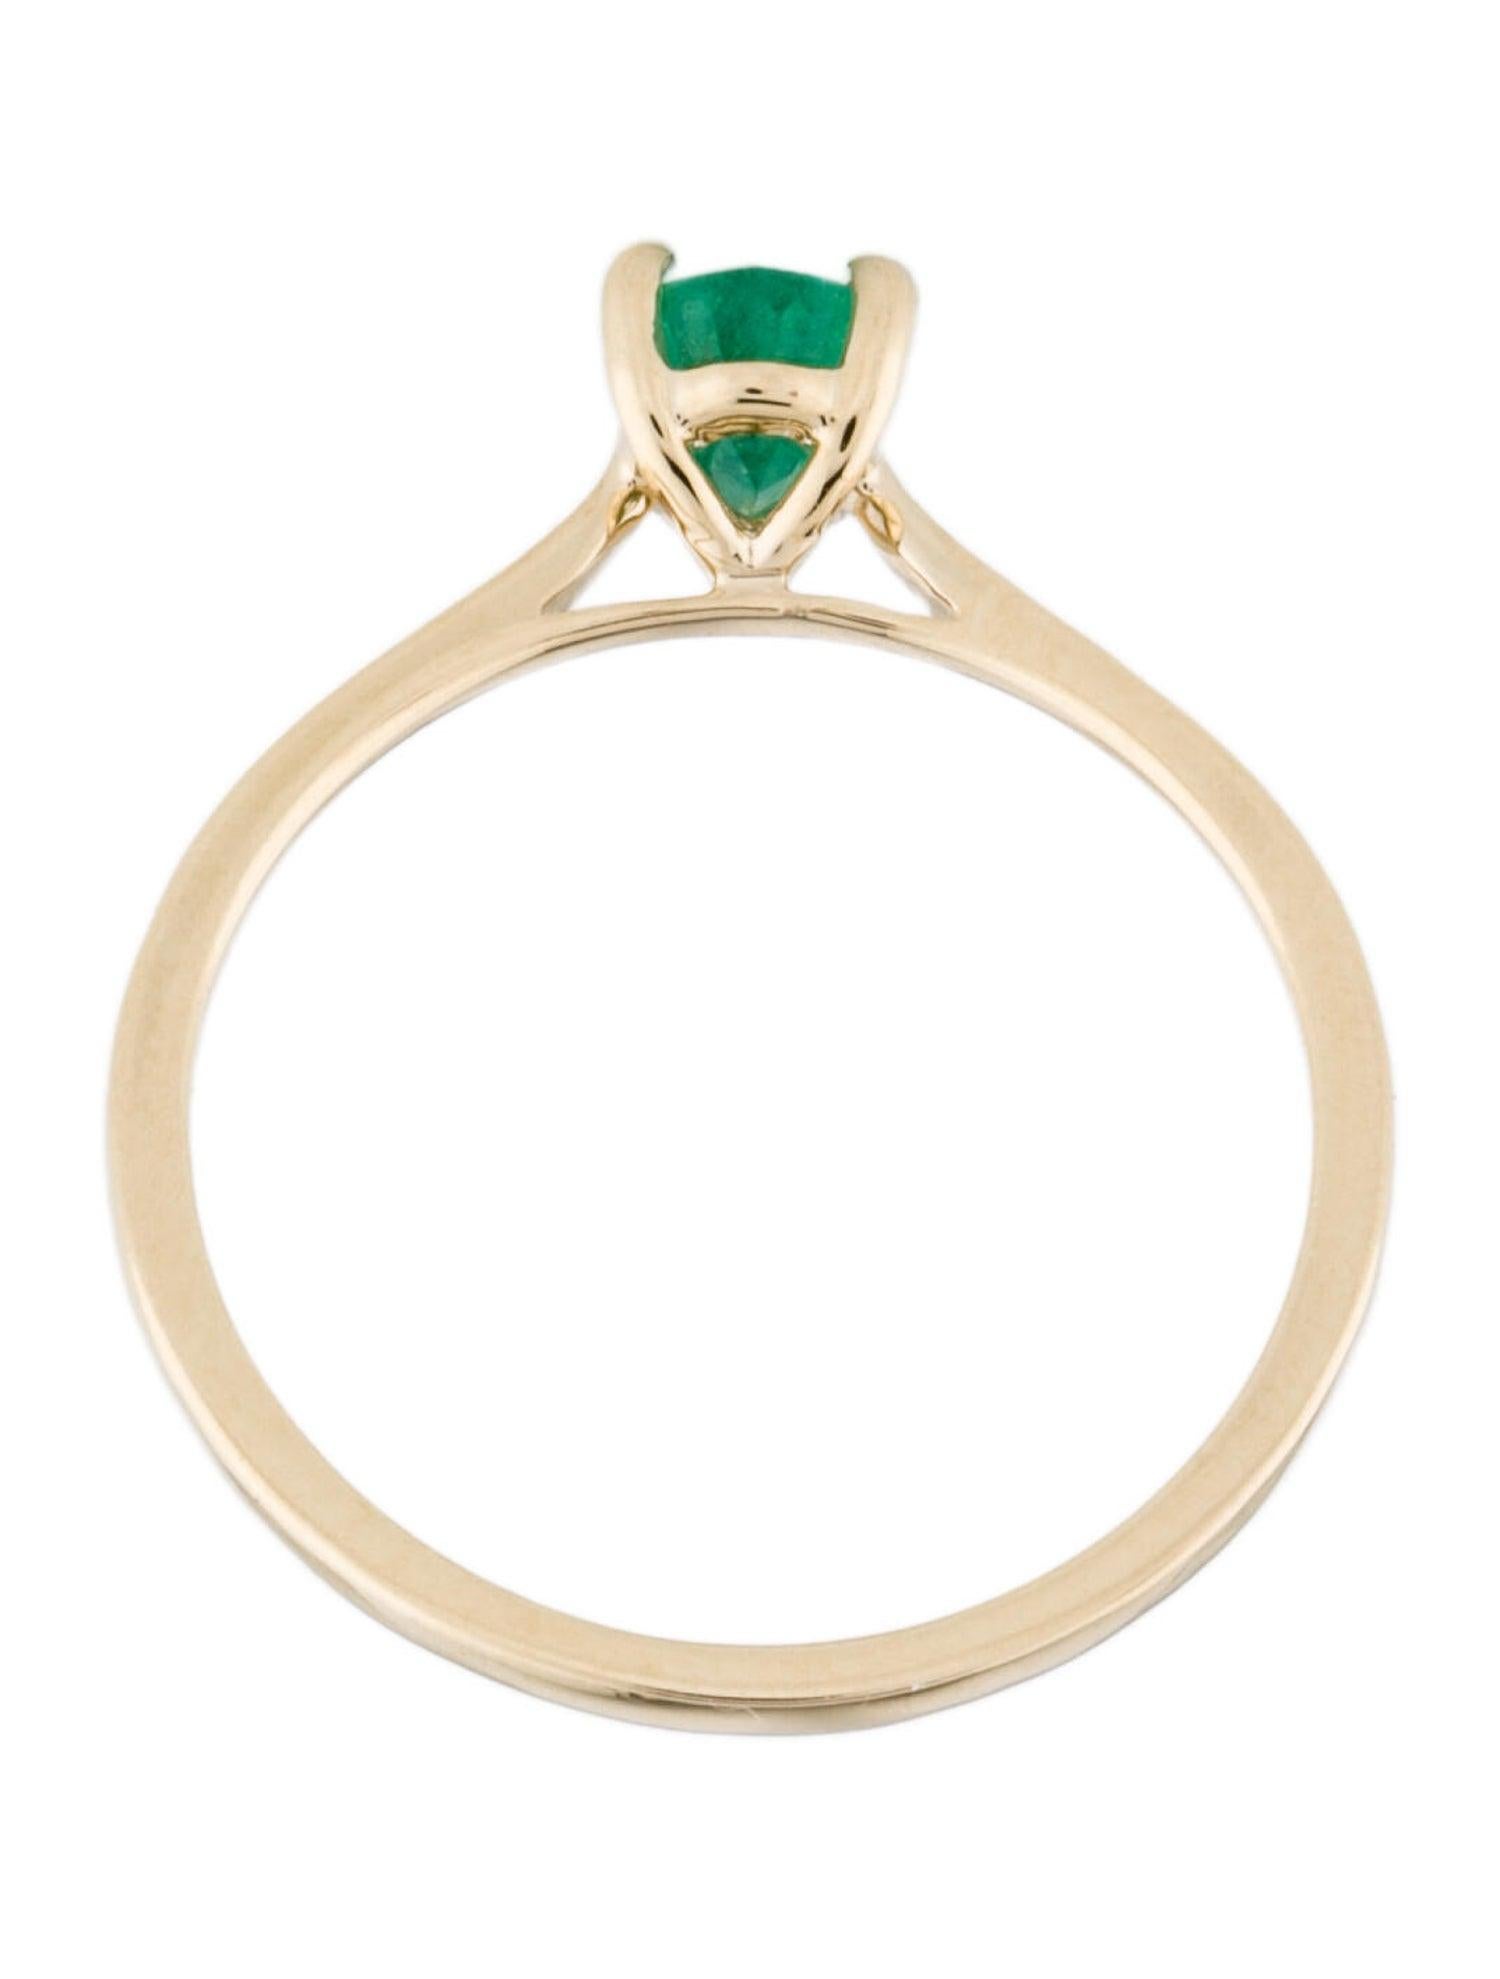 Women's Opulent 14K Emerald Cocktail Ring, Size 7 - Elegant Statement Jewelry For Sale